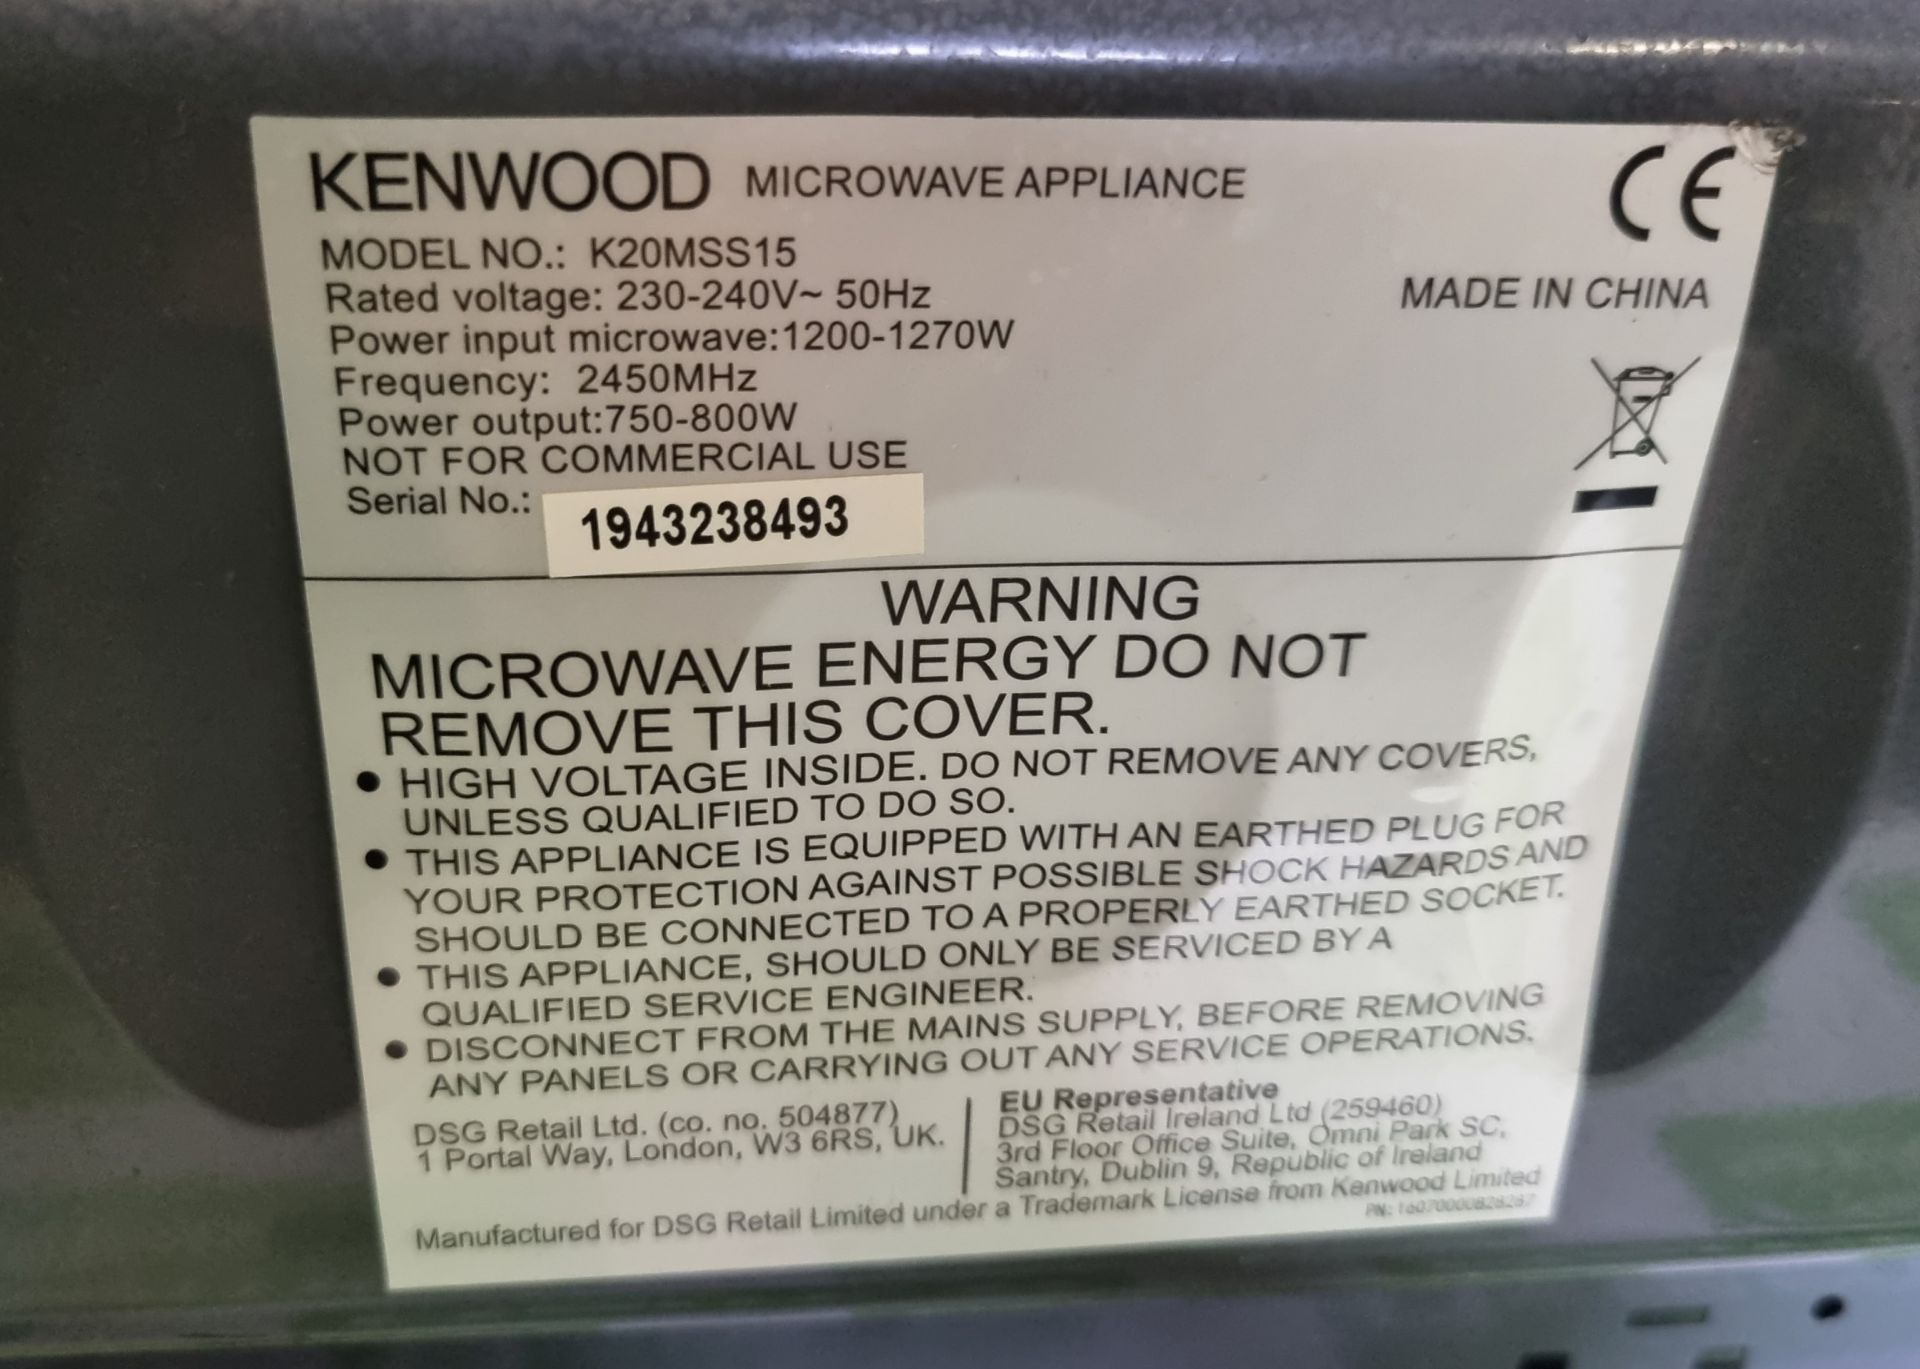 Kenwood K20MMS15 - stainless steel 800W microwave oven - 230V - W 430 x D 360 x H 260 mm - Image 5 of 5